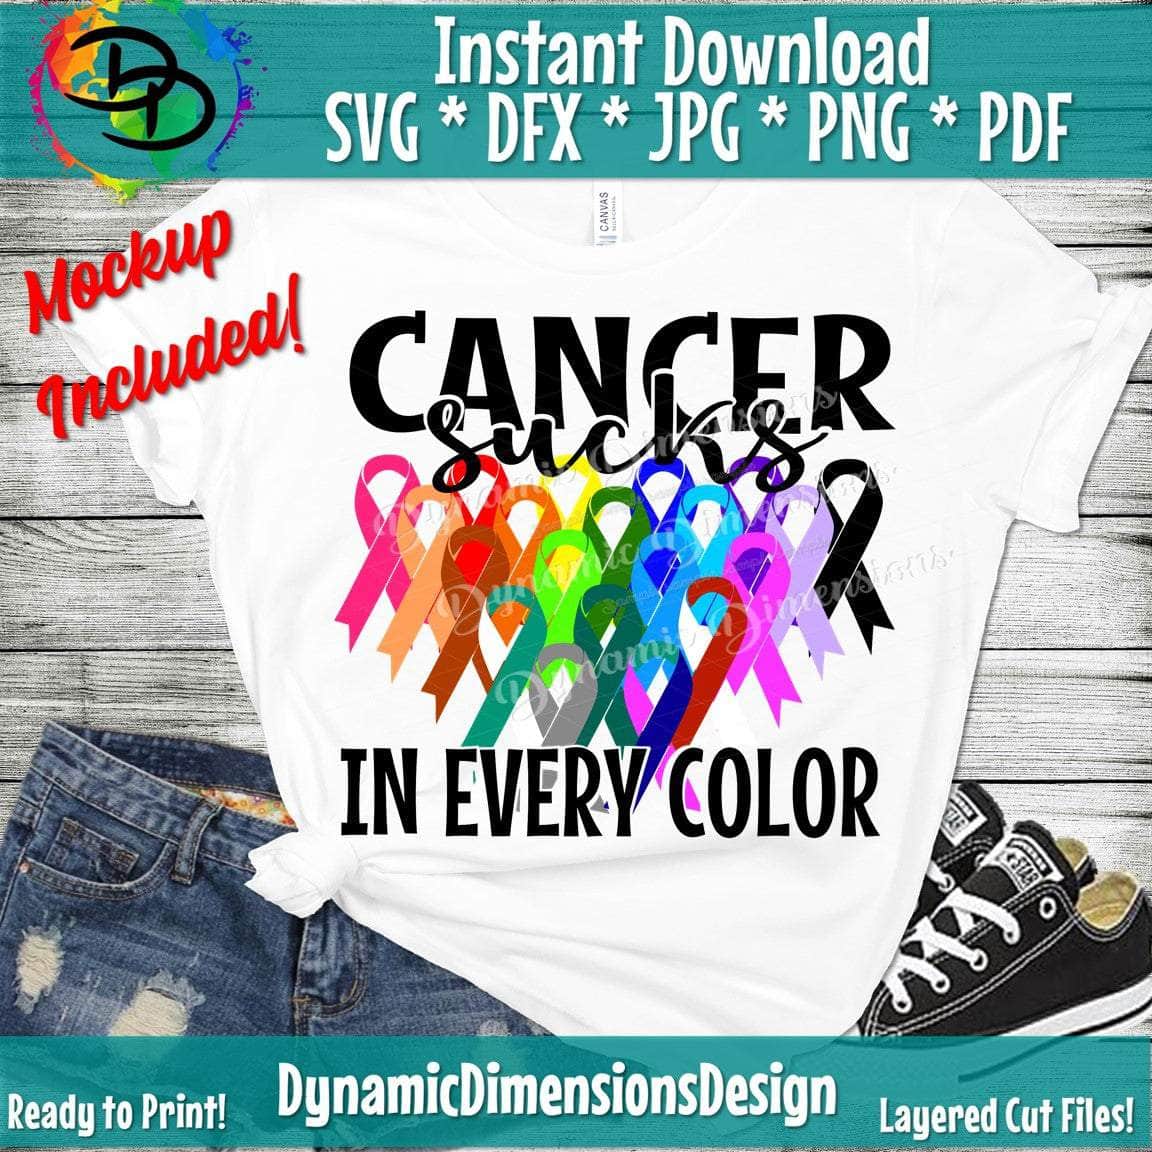 Cancer Sucks In Every Color